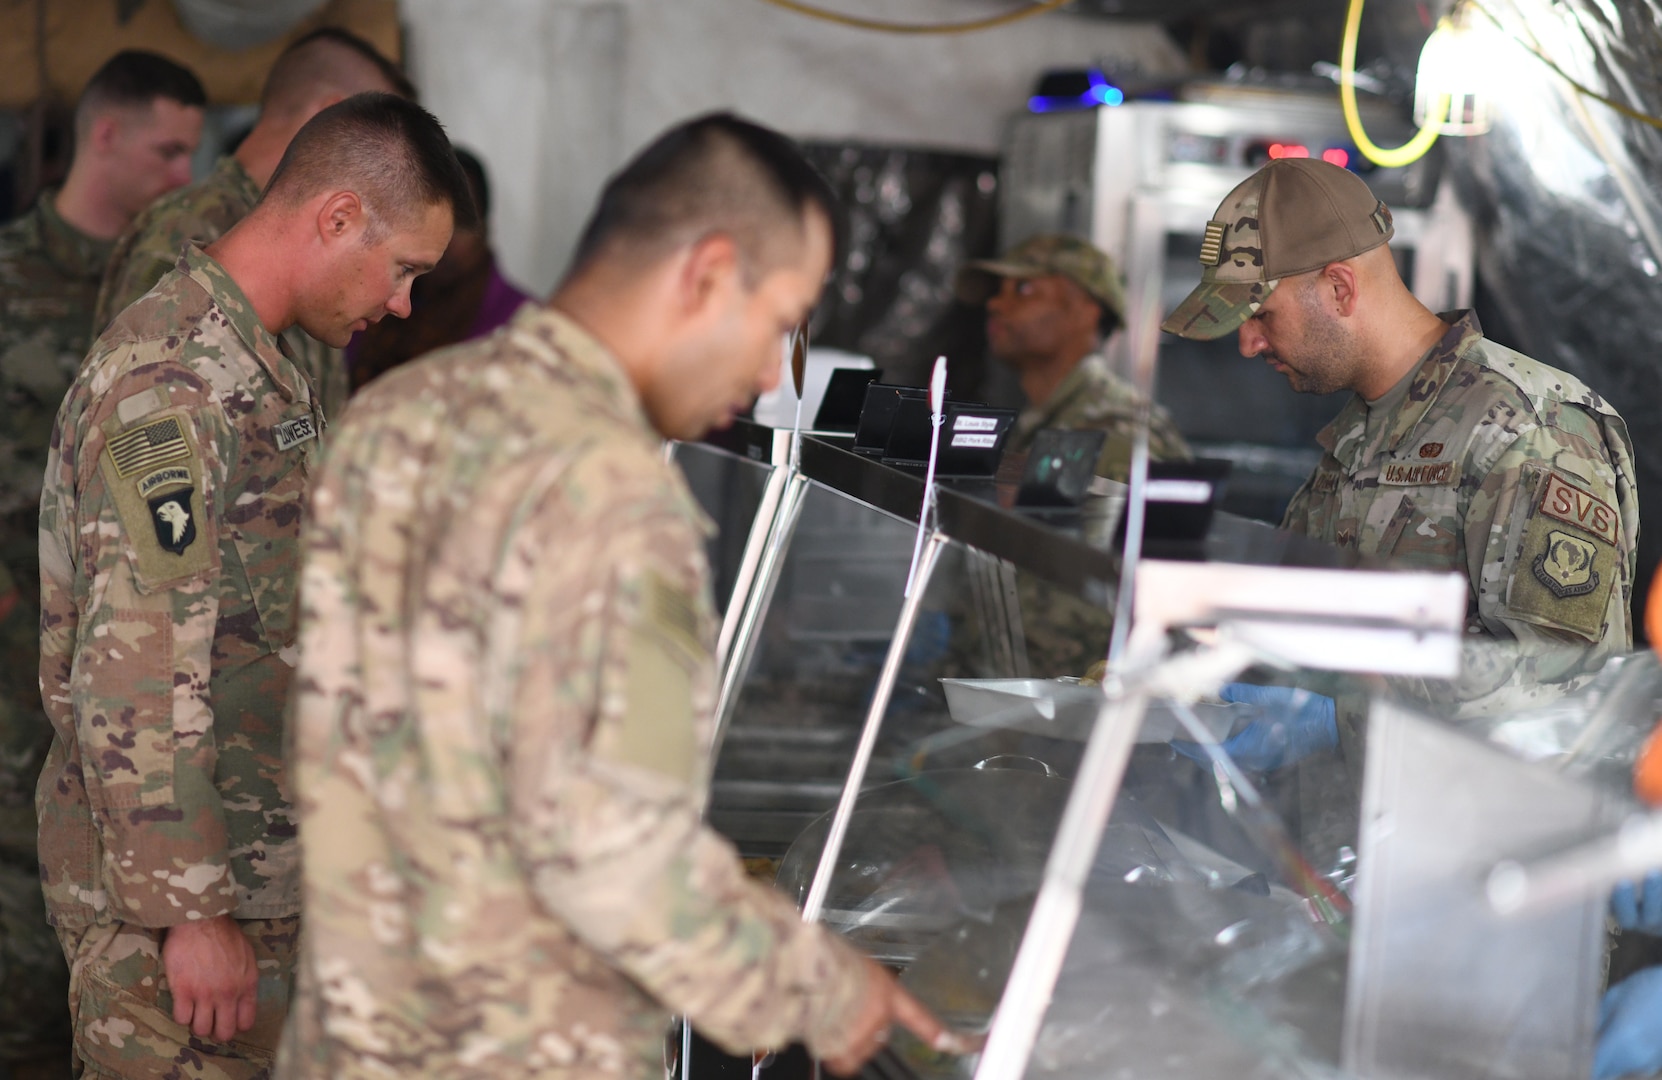 Members of the 776th Expeditionary Air Base Squadron Services team serve food to dining facility patrons at Chabelley Airfield, Djibouti, Nov. 13, 2109. The services Airmen receive, inspect, prepare and serve roughly 800 meals each day to Airmen, Soldiers and contractors fulfilling their duties on the airfield. (U.S. Air Force photo by Staff Sgt. Alex Fox Echols III)